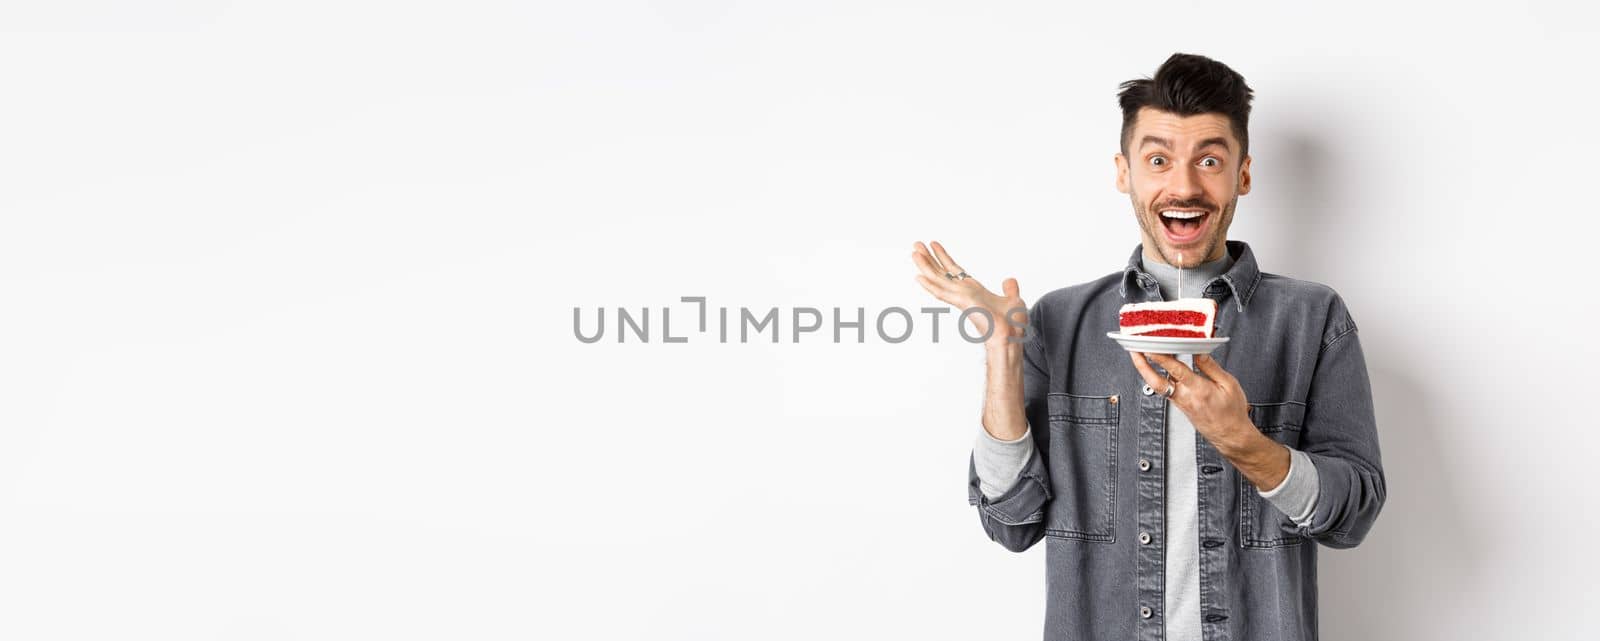 Excited man celebrating birthday, looking happy, holding cake with candle, making wish, standing happy against white background.